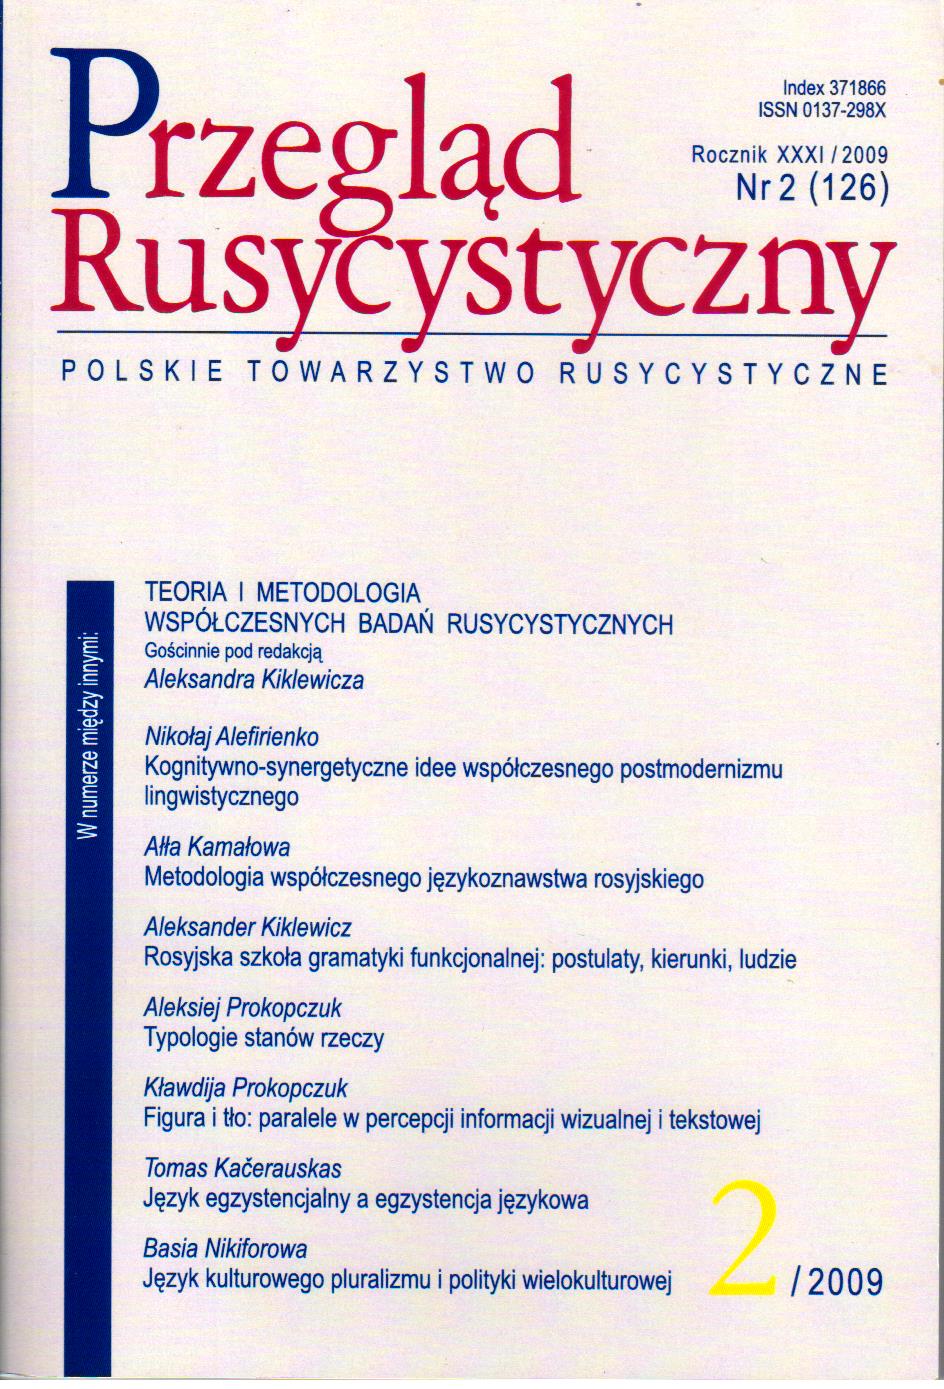 On two peripheric microsystems with meaning of anger in Russian, Polish and Czech Cover Image